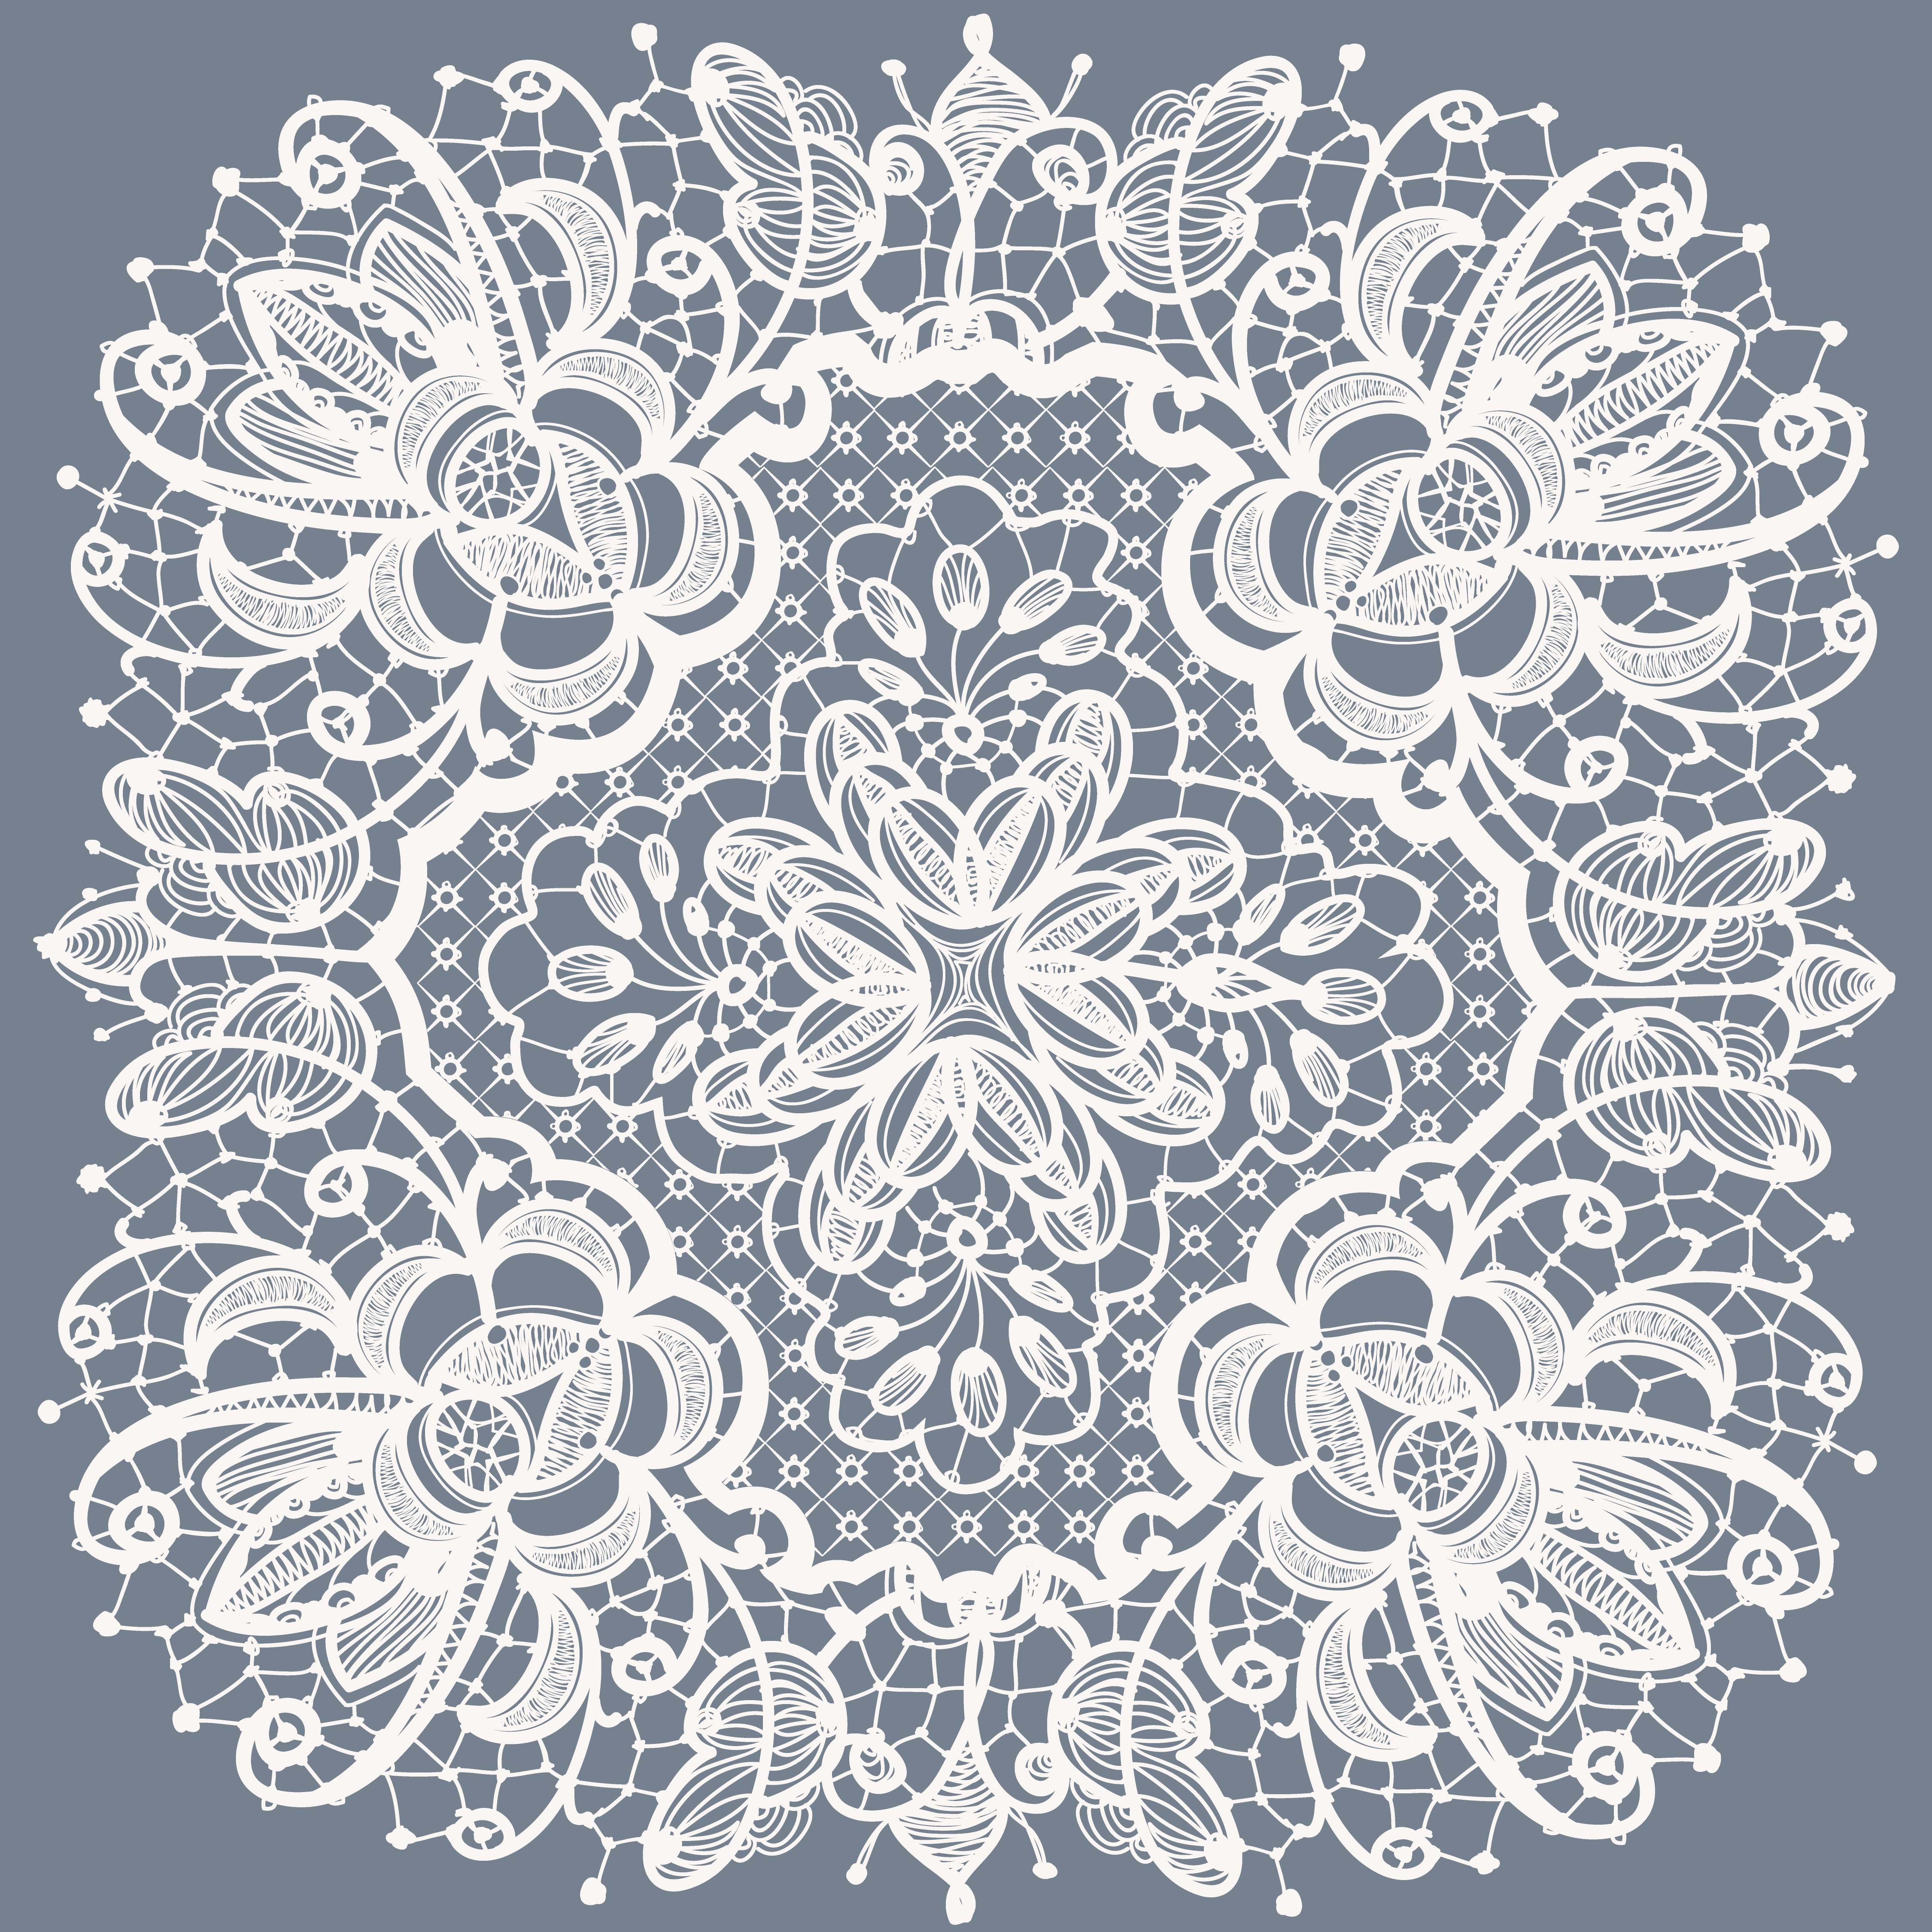 abstraction-floral-lace-pattern-480046-vector-art-at-vecteezy